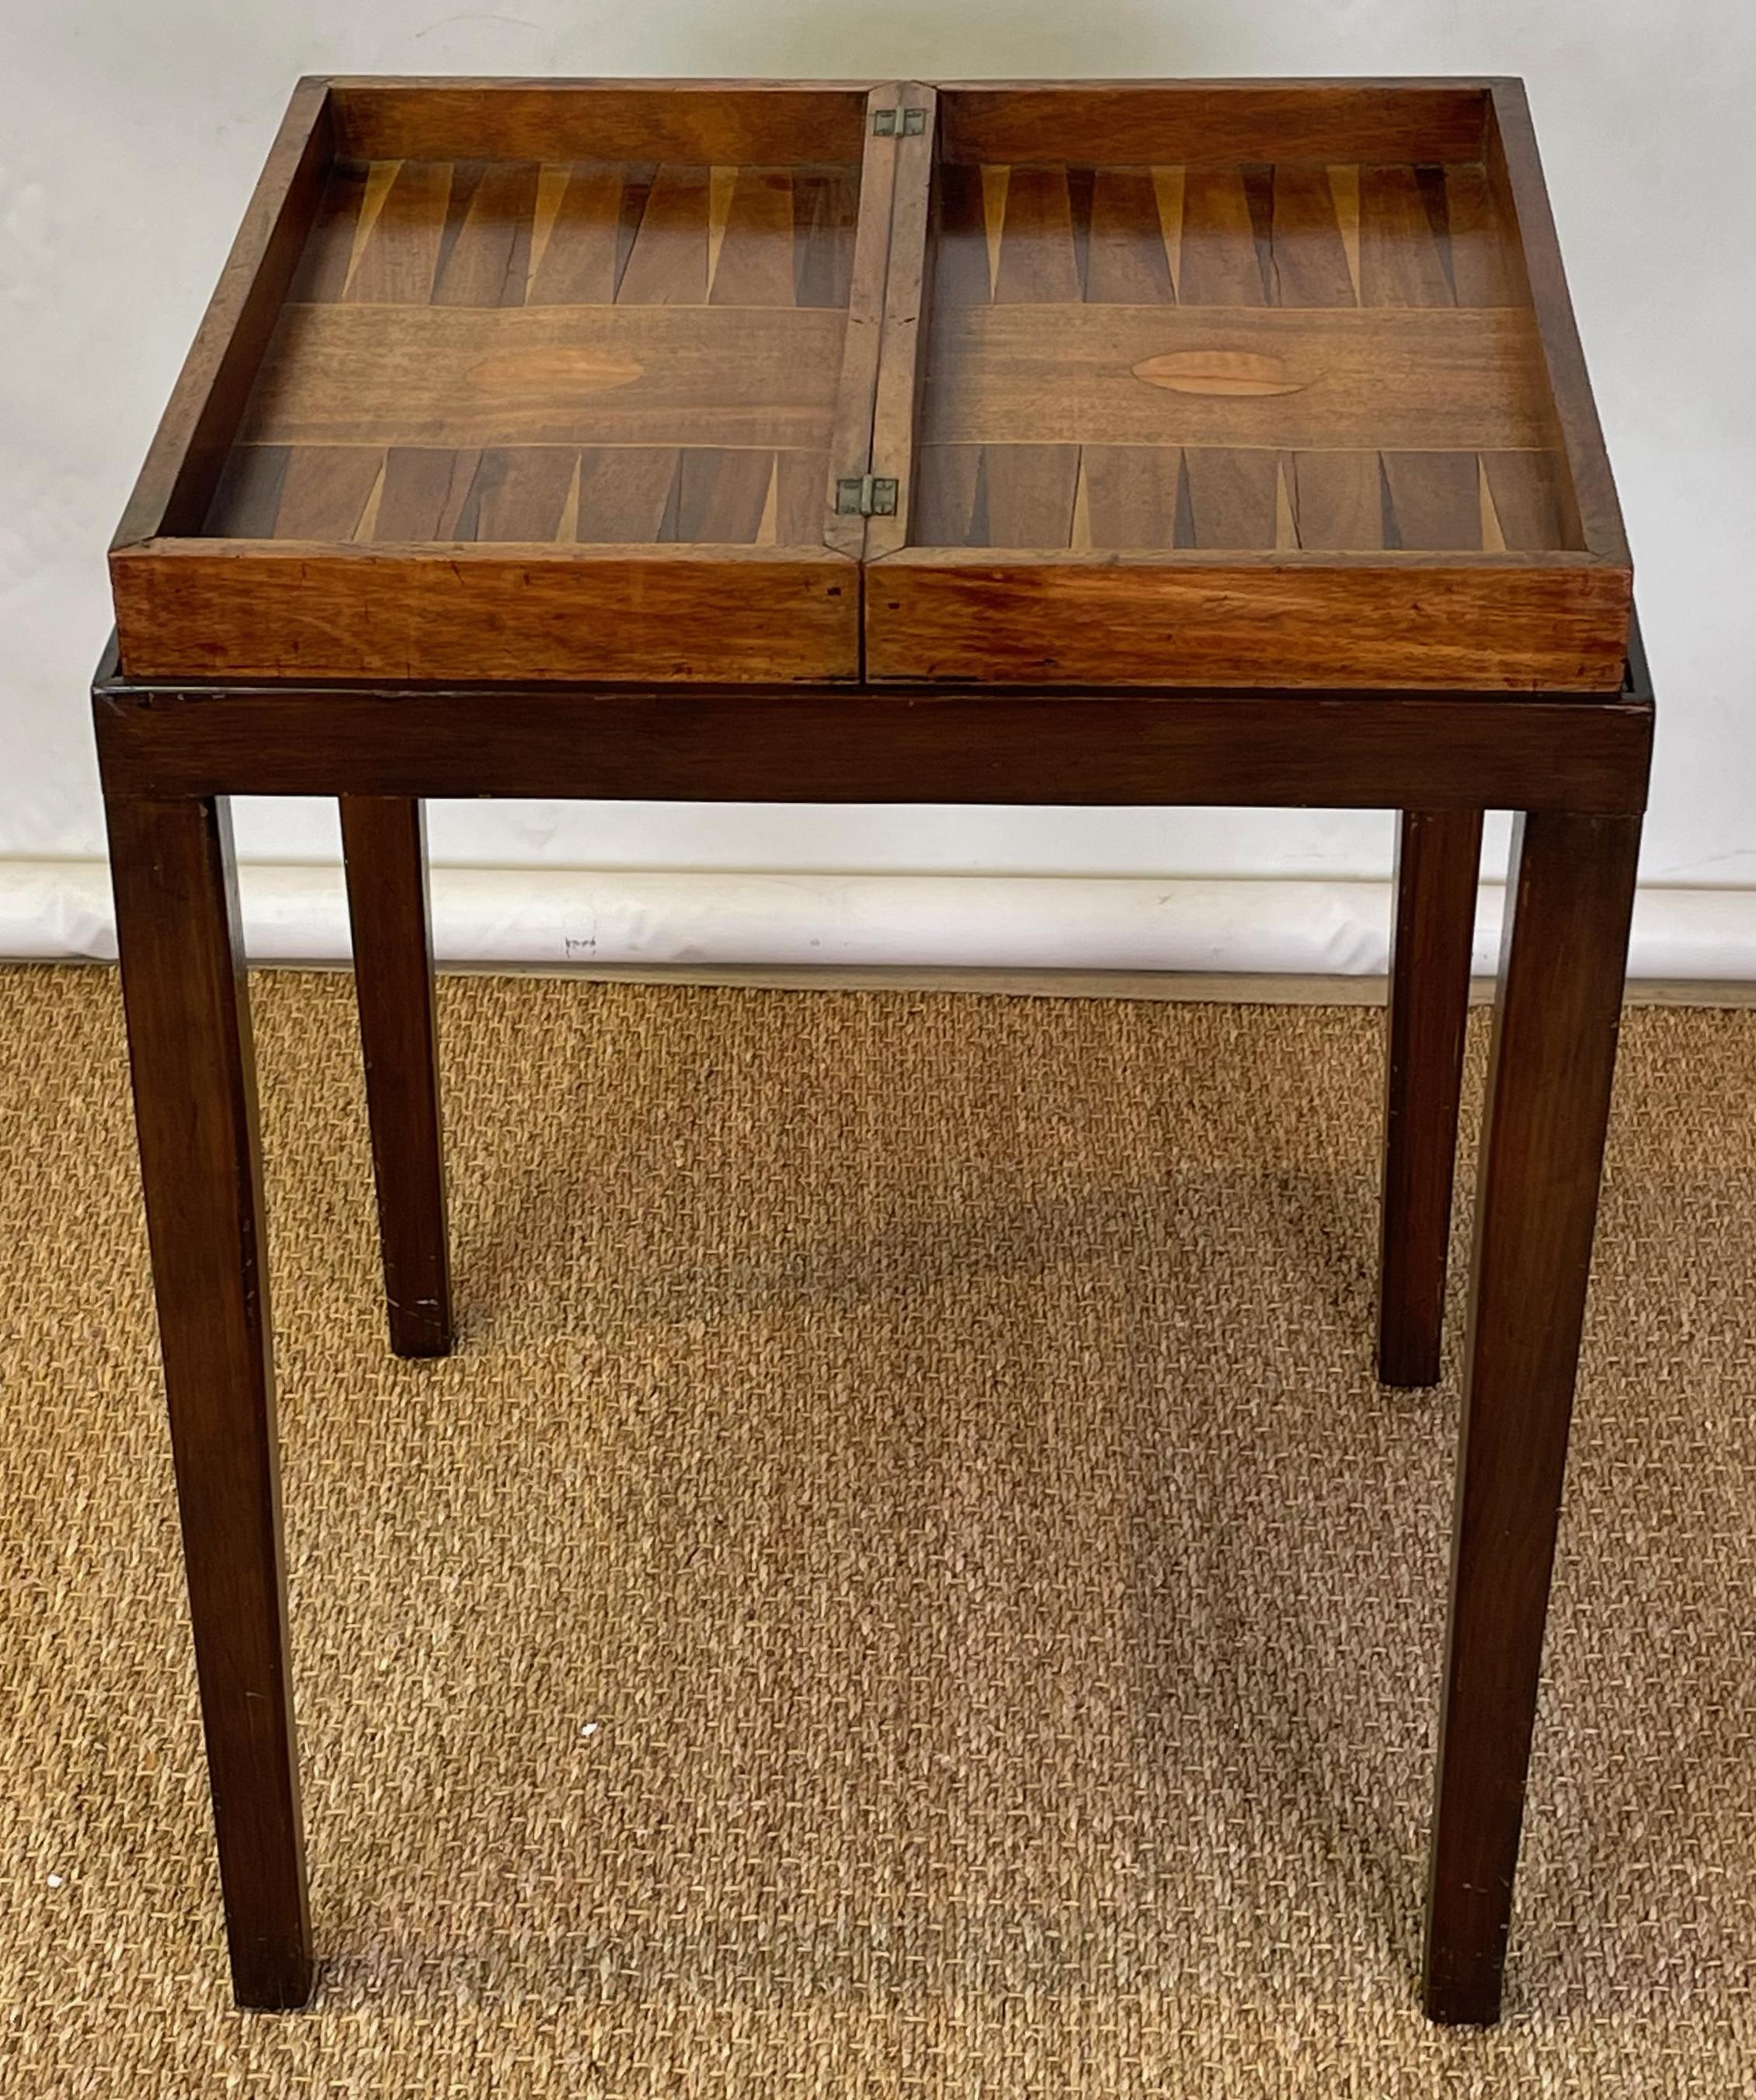 And early 19th C. American Chess, Checkers and Backgammon board fashioned into a games table with later mahogany stand fitted to the board.